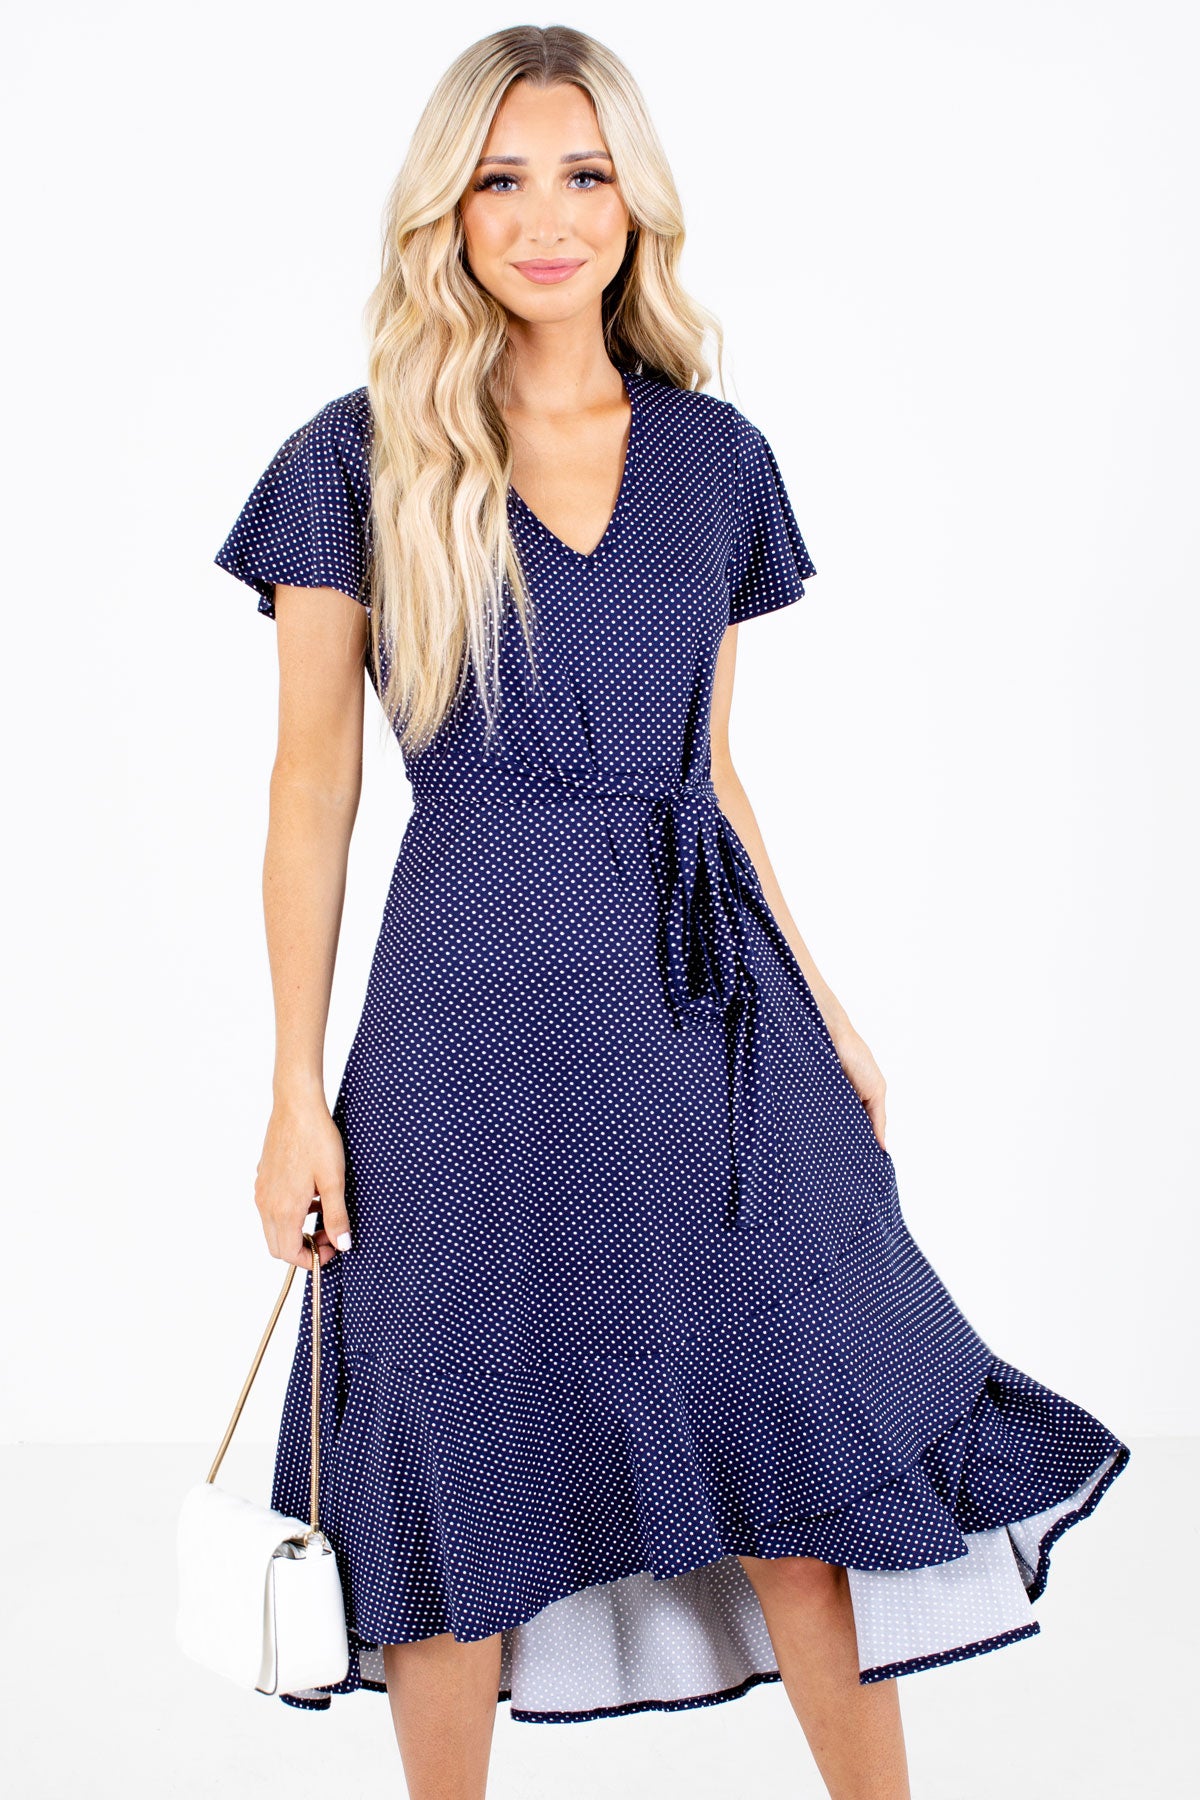 Navy and White Polka Dot Boutique Dresses for Women